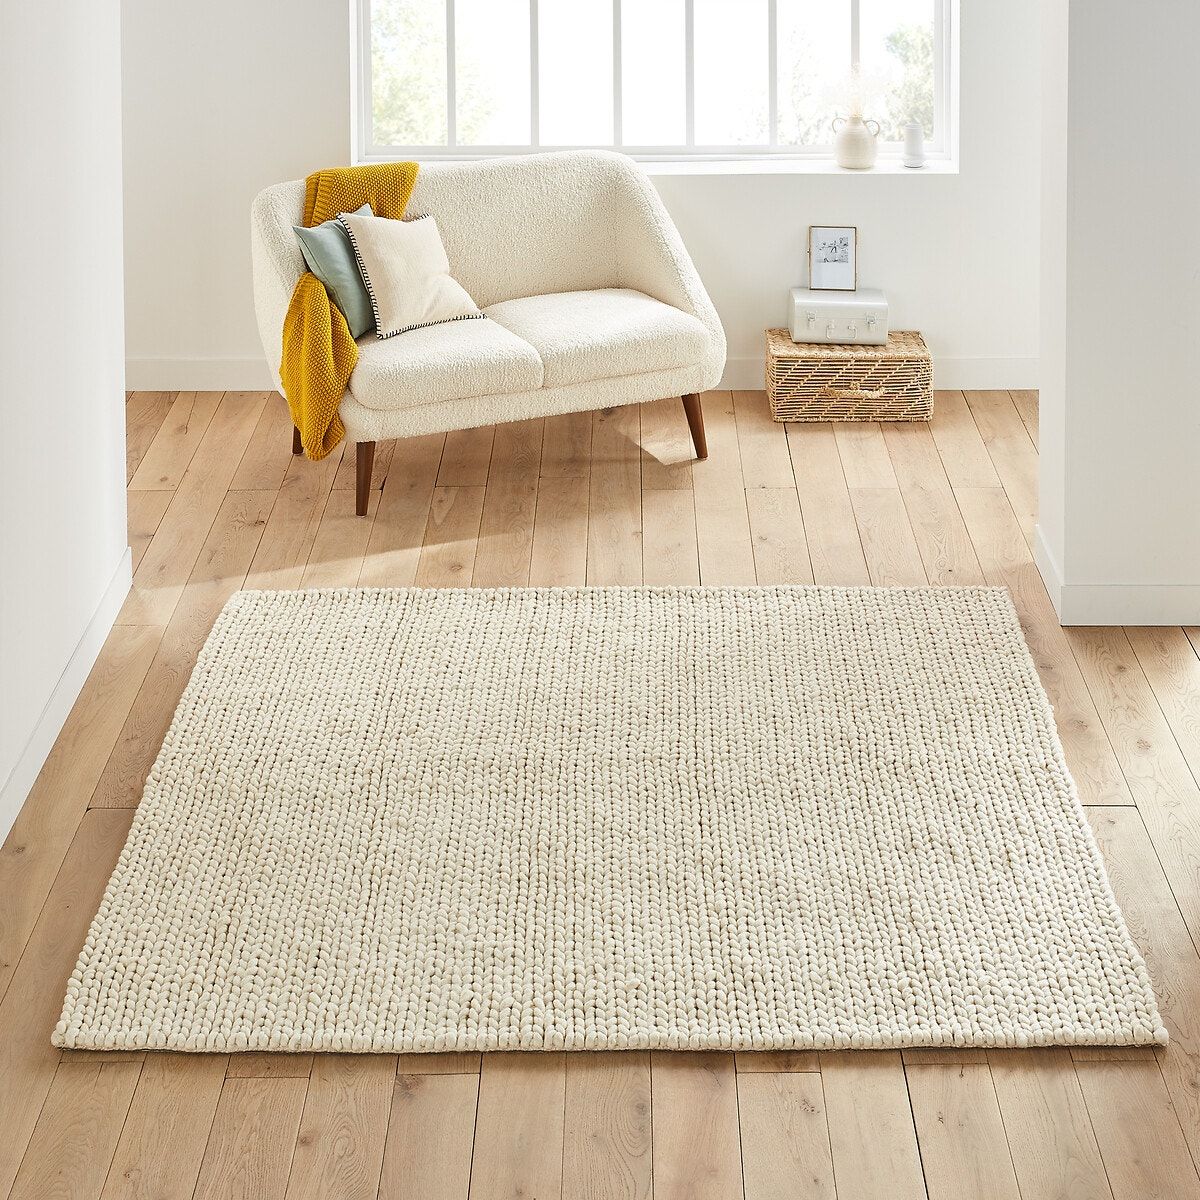 Diano Knit Effect Square 100% Wool Rug La Redoute Interieurs | La Redoute Regarding Square Rugs (Photo 3 of 15)